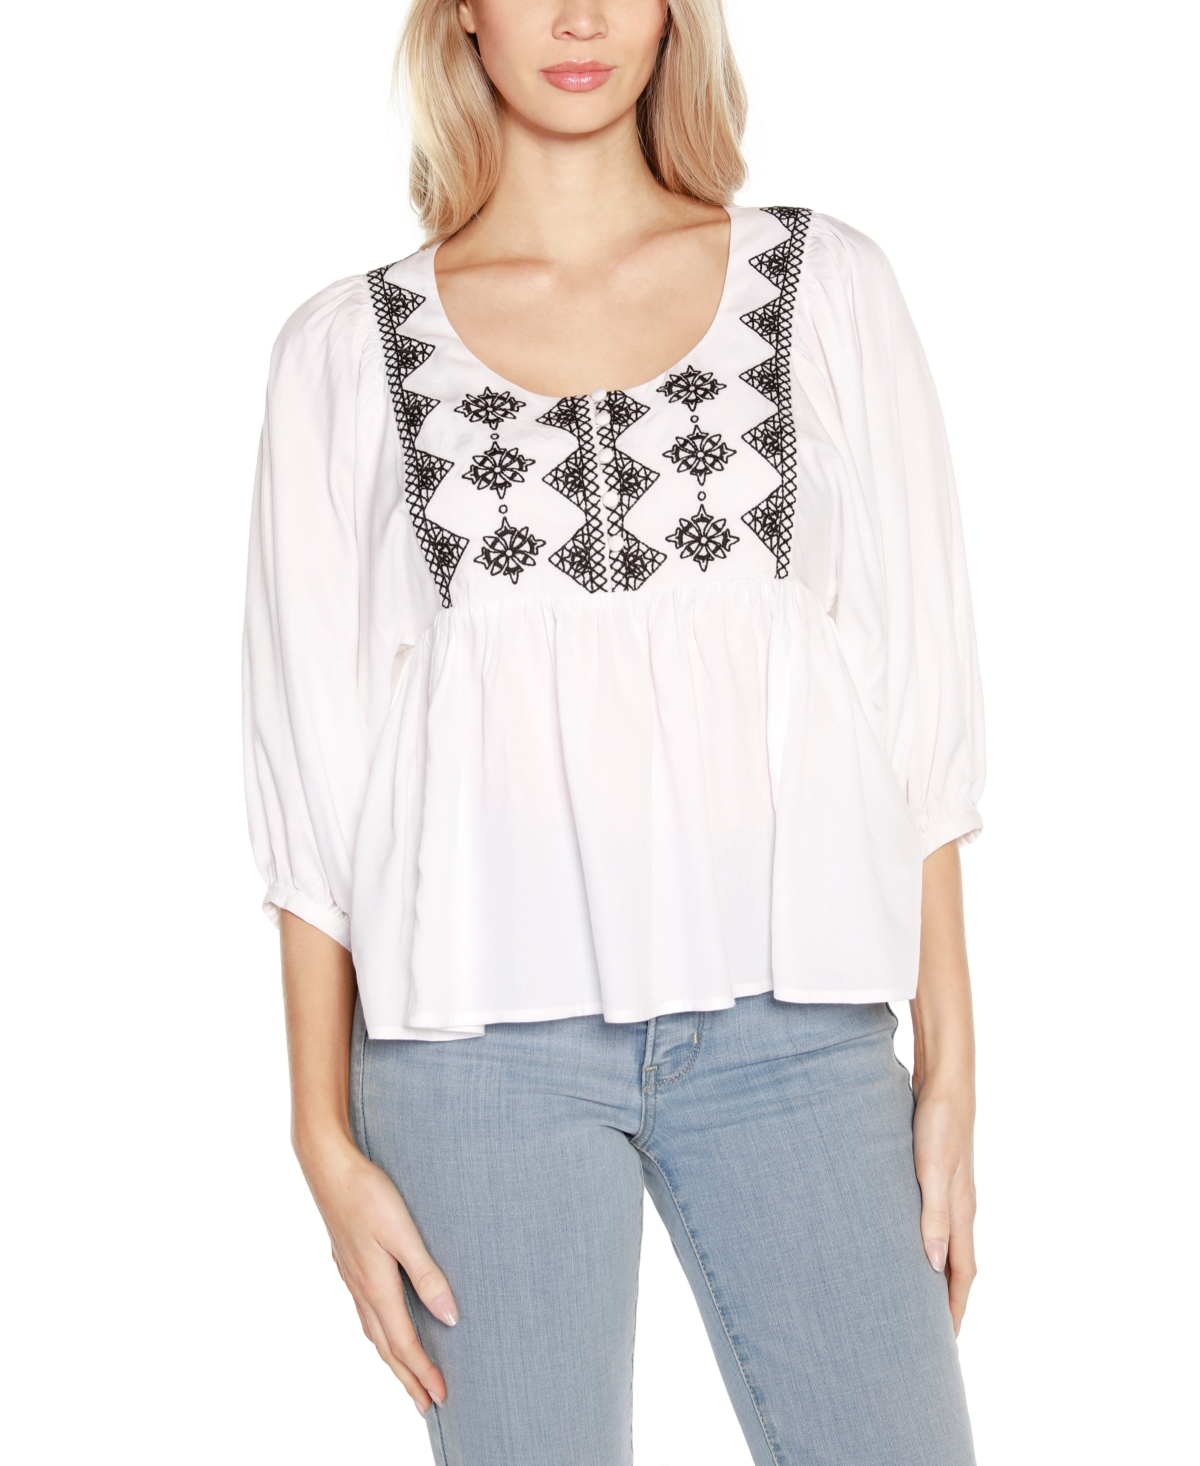 Black Label Embroidered Boho Fit-and-Flare Top - Wht/blk